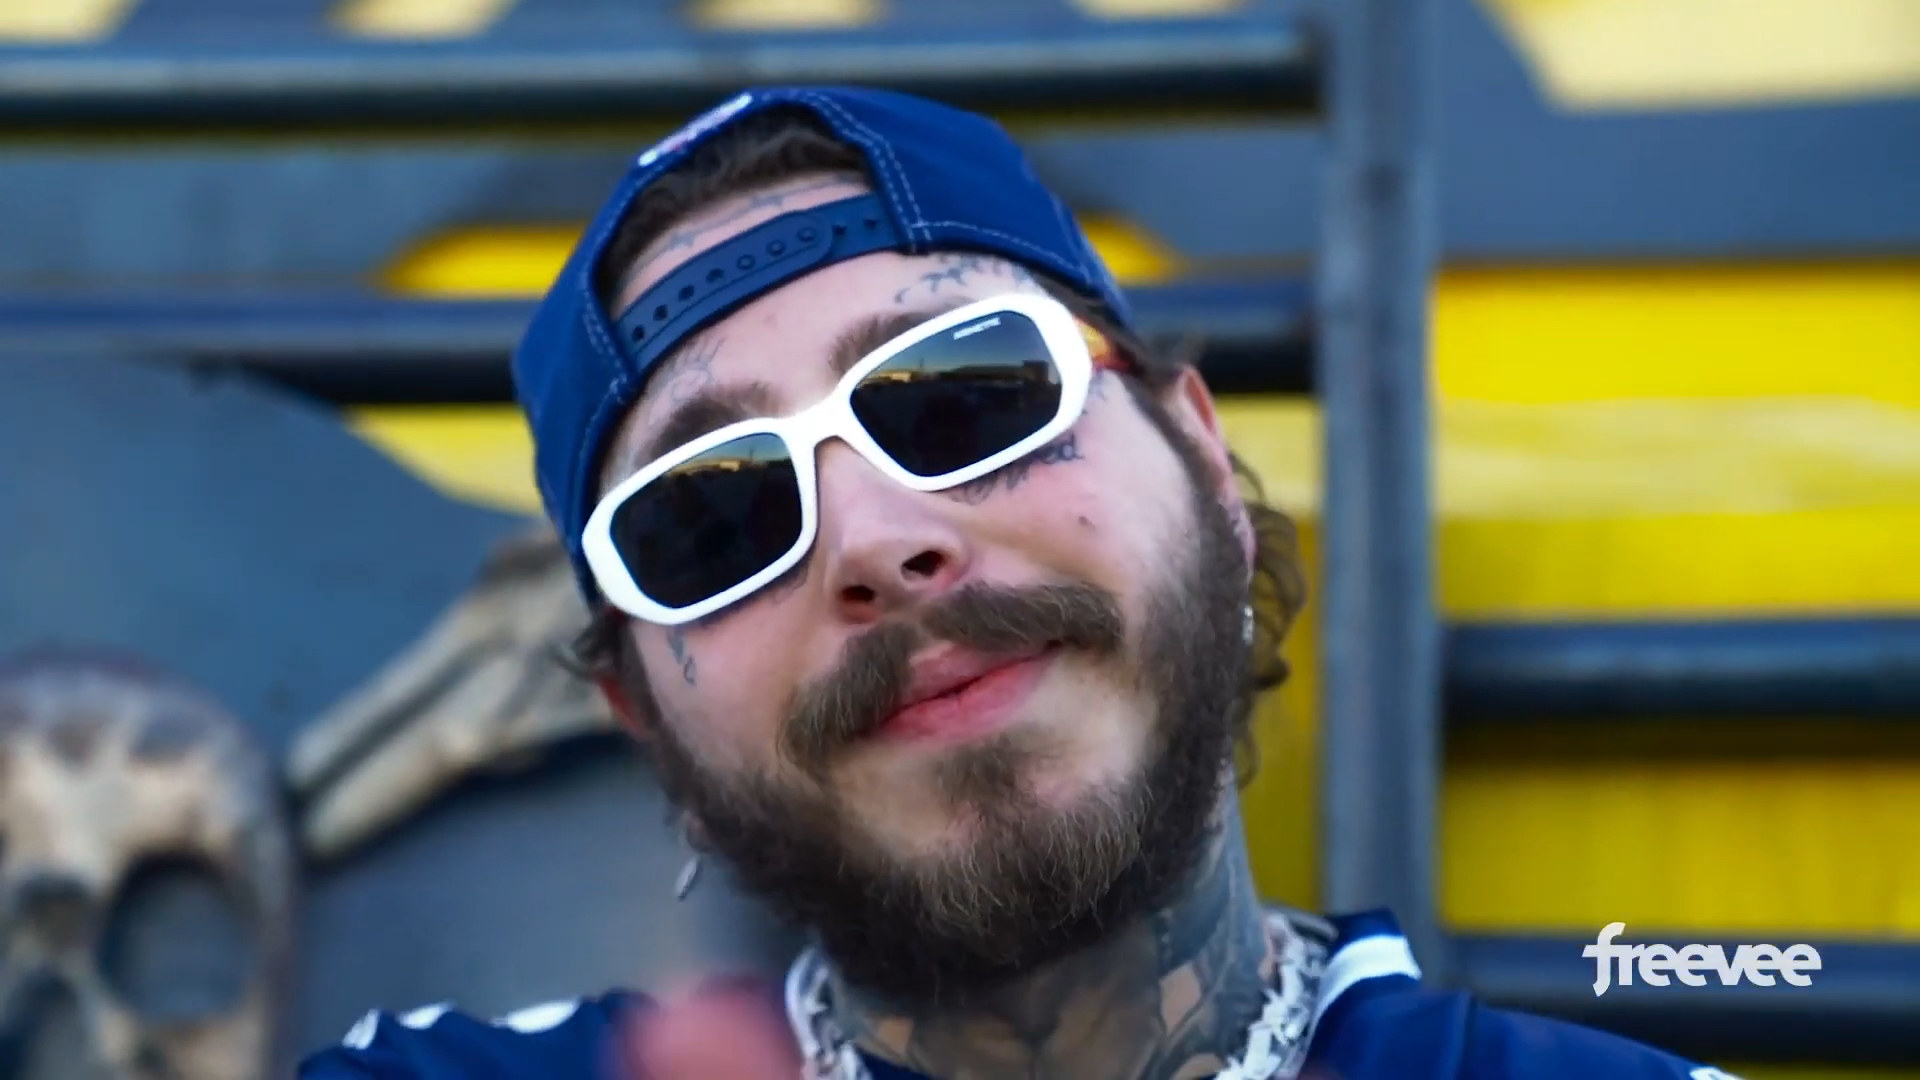 Post Malone smiling at the camera in &quot;Post Malone: Runaway&quot;